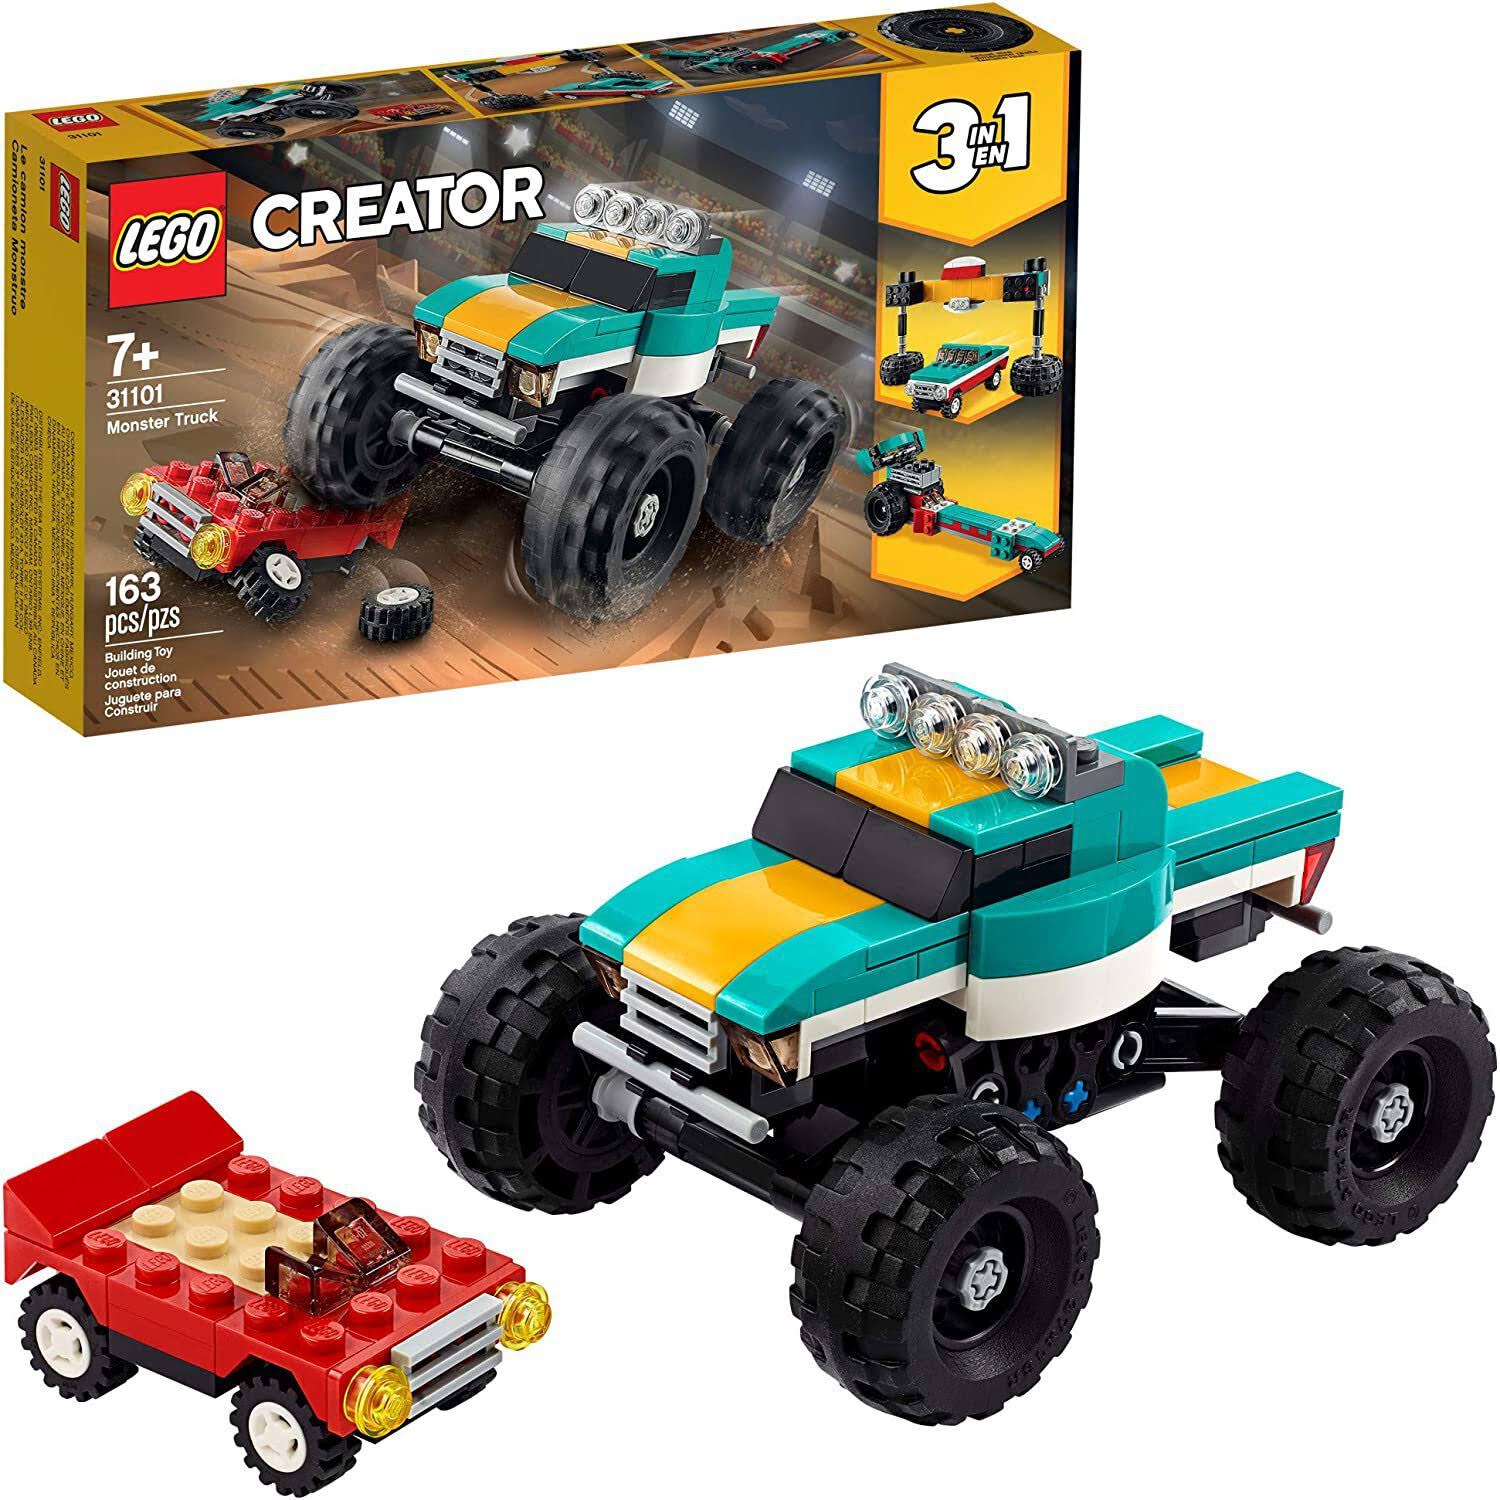 Lego Creator Monster Truck, Building Toy, 163 Pieces - 163 pcs